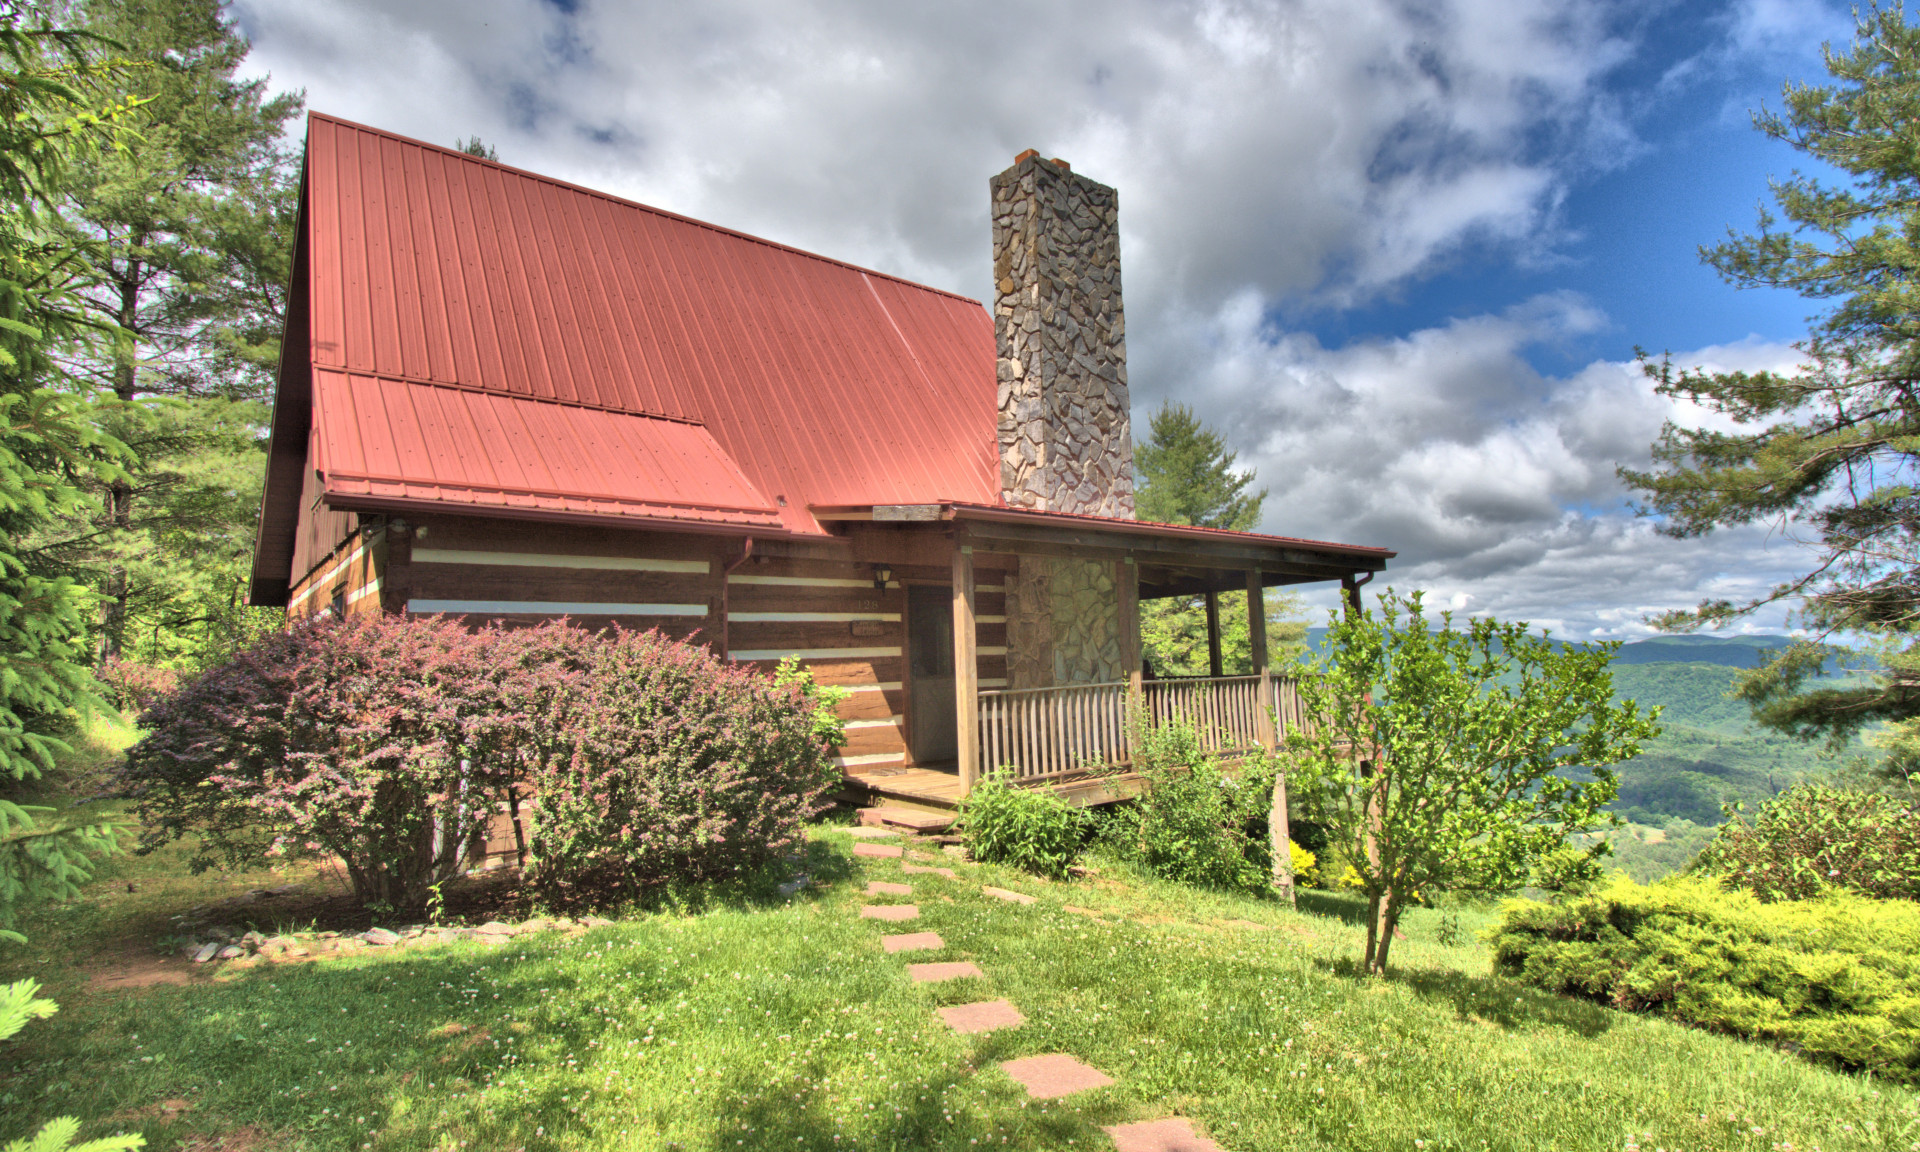 High on Kindrick Mountain, a private gated community in the Mouth of Wilson area of Grayson County in the Virginia Mountains, this charming 2-bedroom, 2-bath log cabin overlooks layers of mountain vista views and enjoys privacy of a 13.27 acre setting.